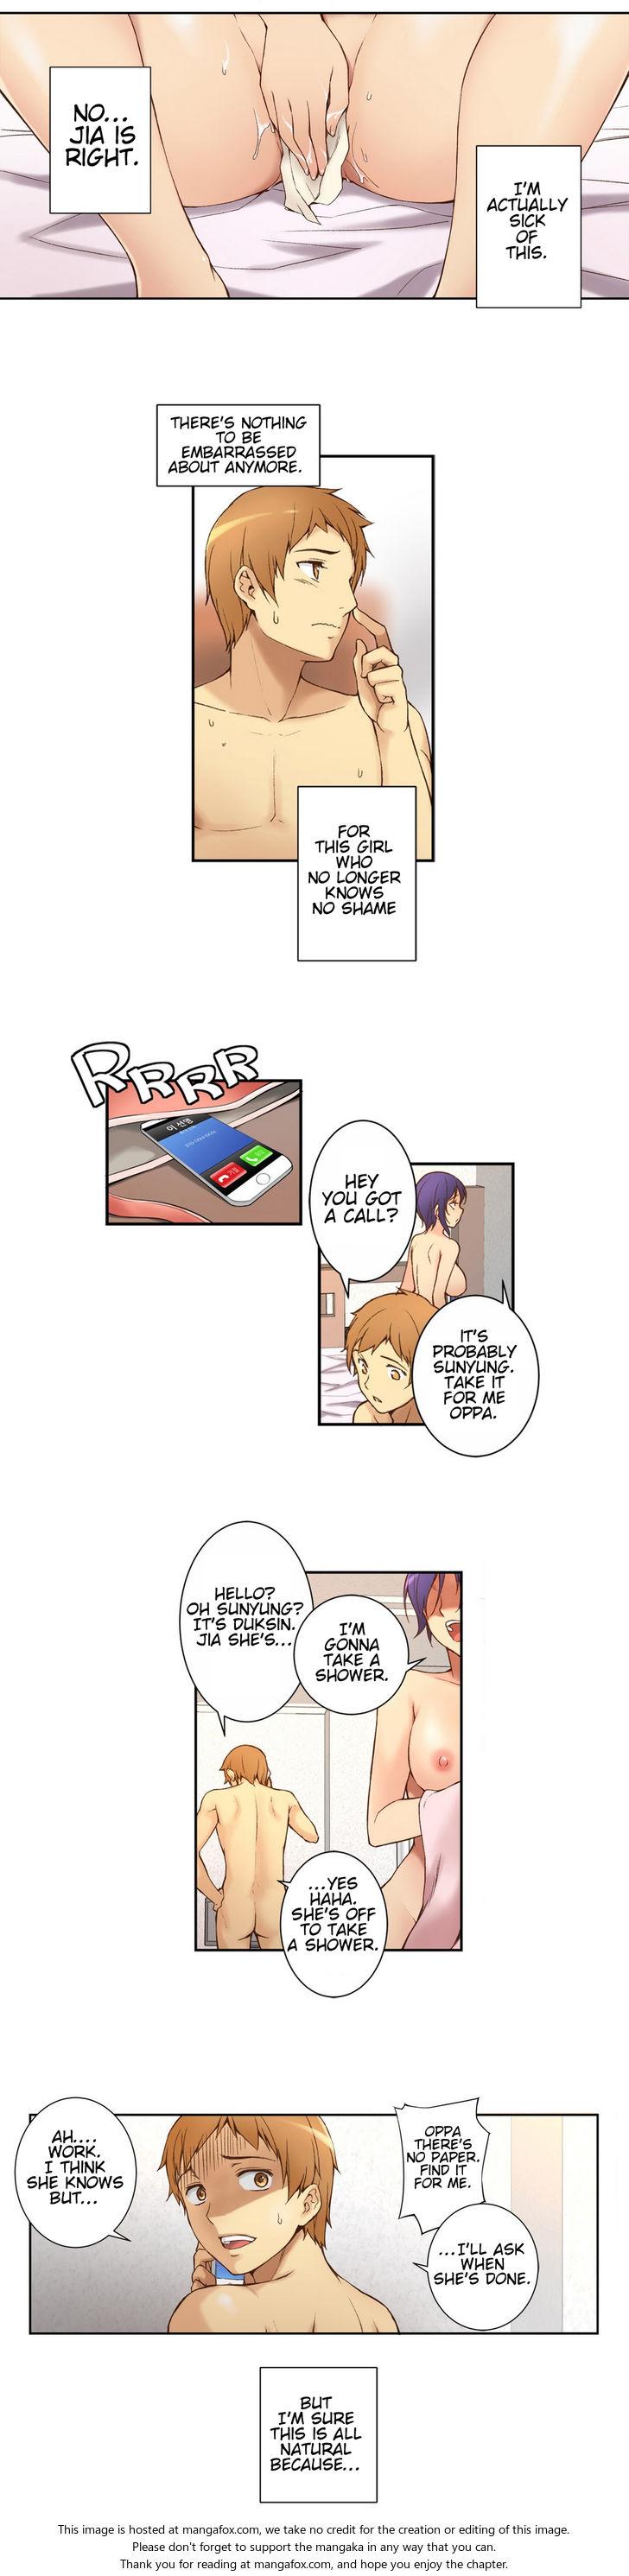 Bribe [Donggul Gom] She is Young (English) Part 1/2 Granny - Page 8